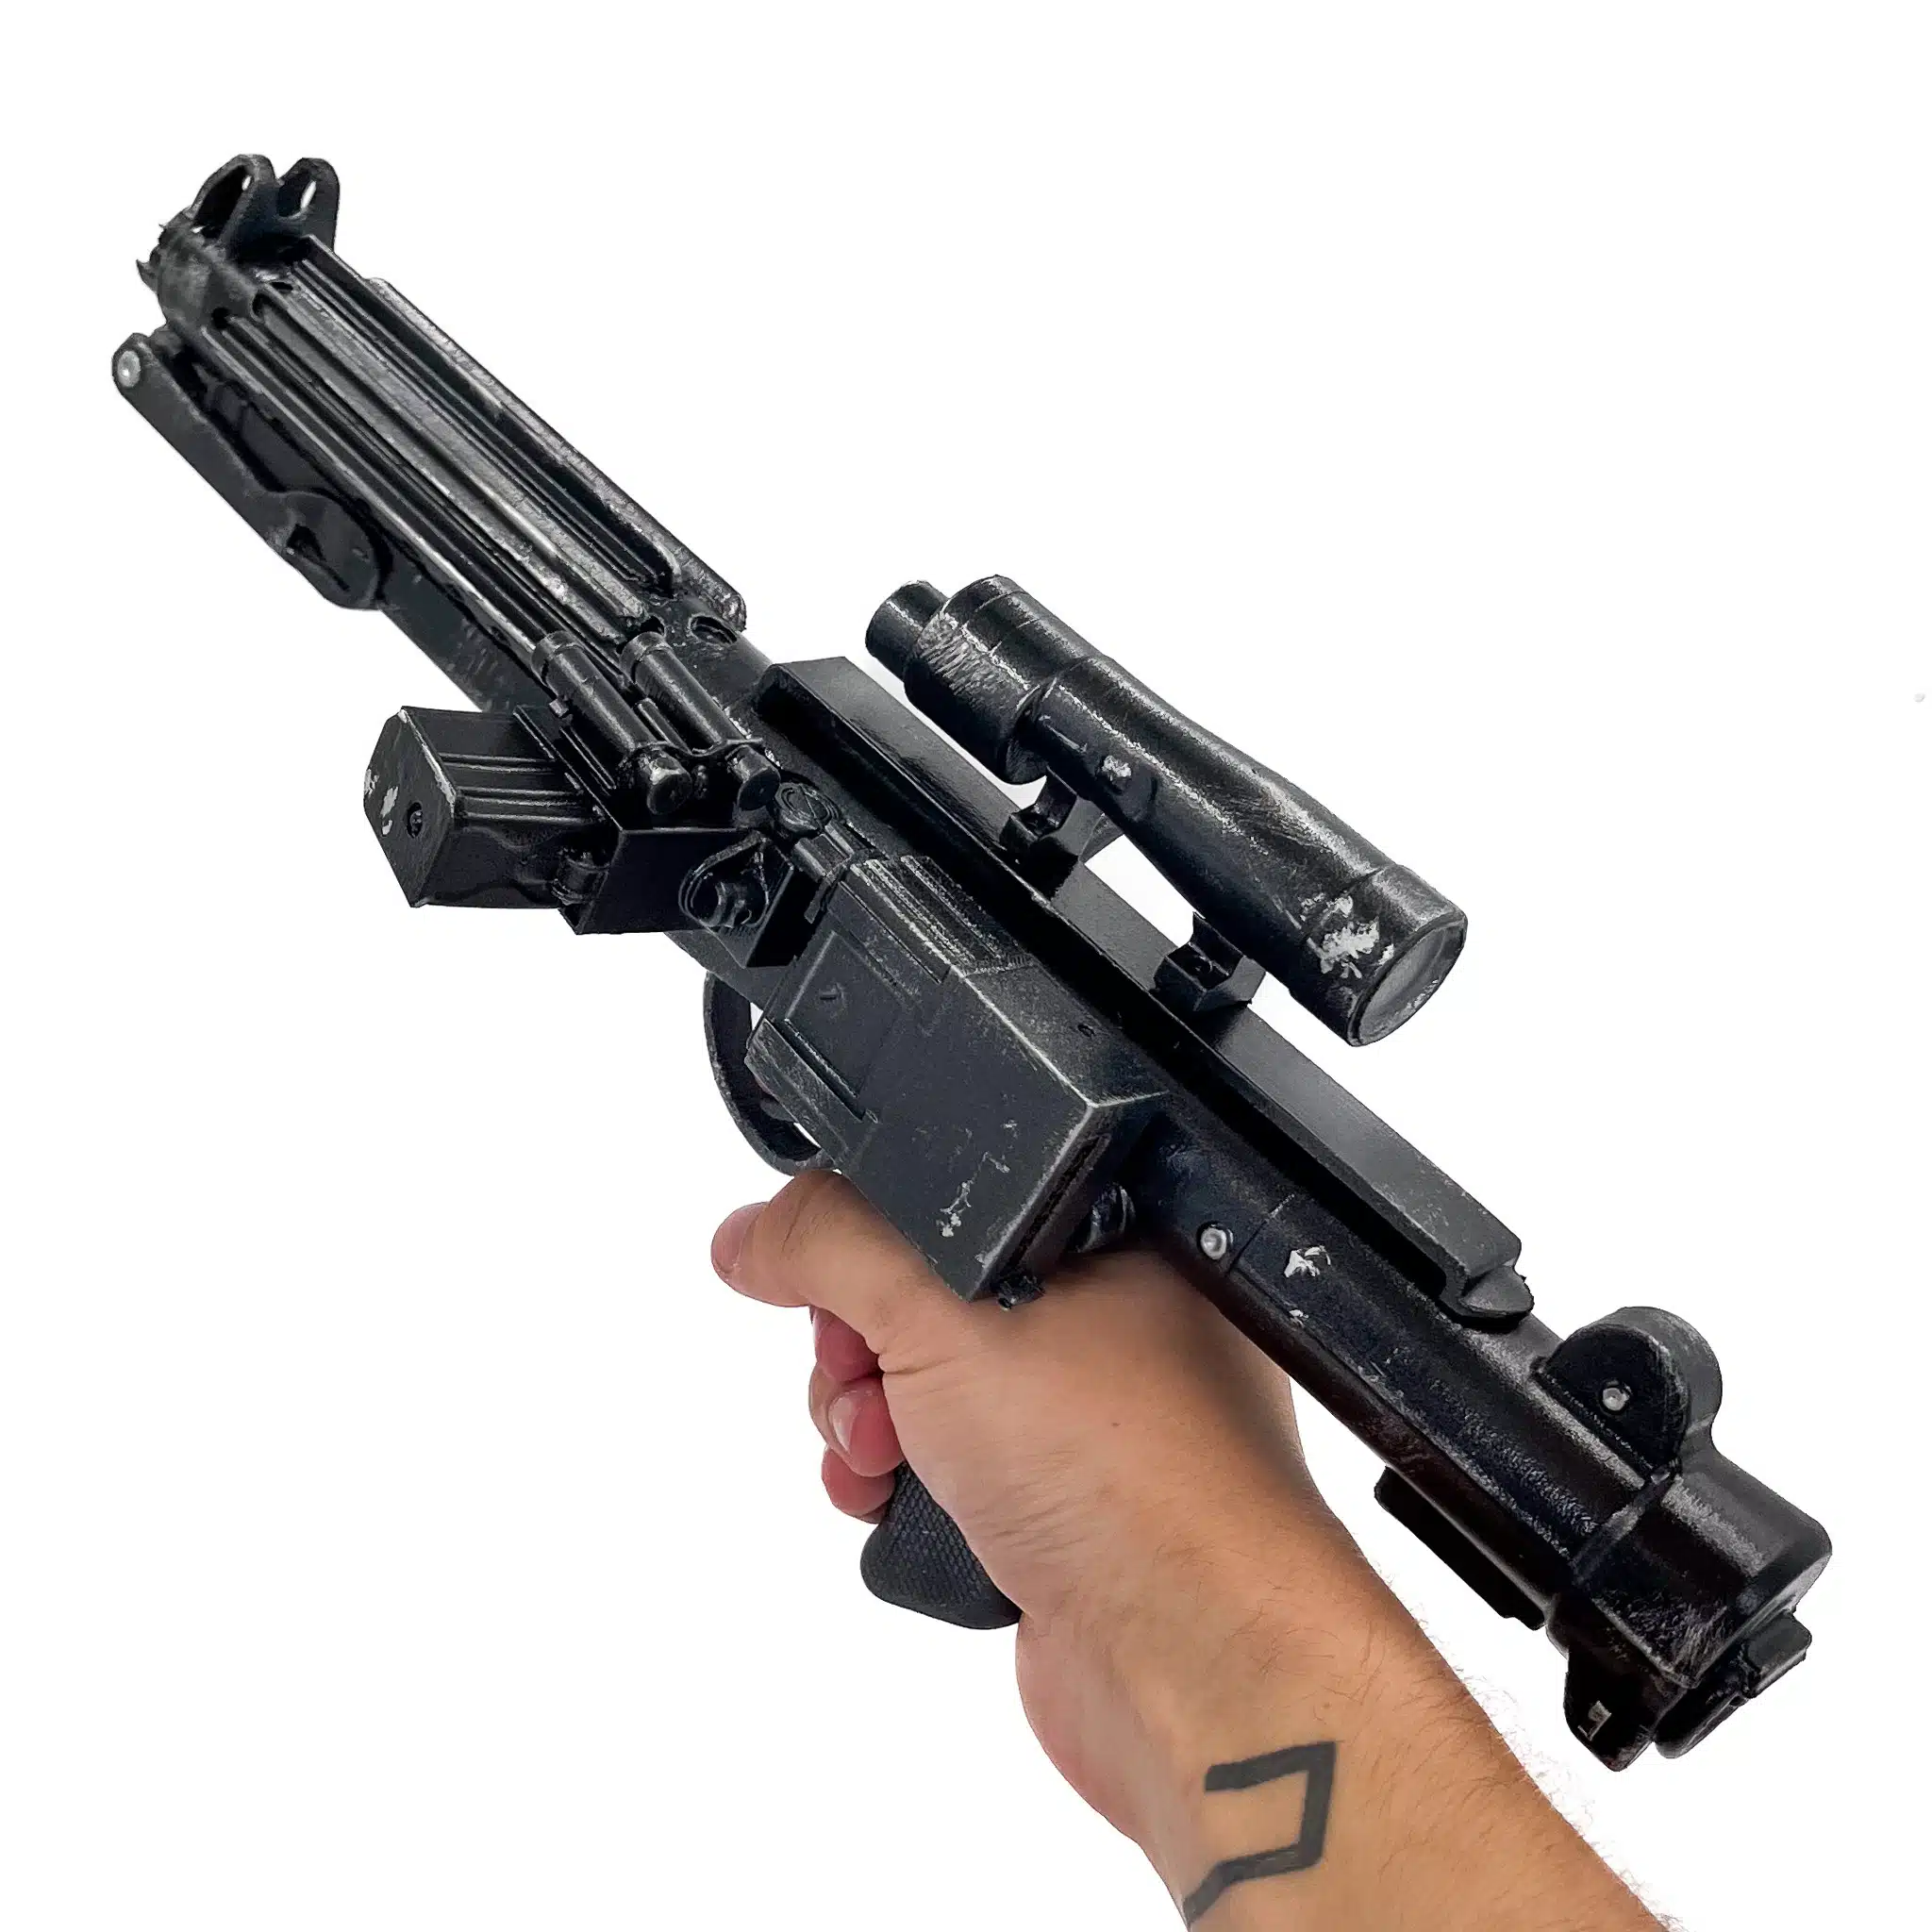 Hand-painted E-11 blaster rifle Star Wars replica prop